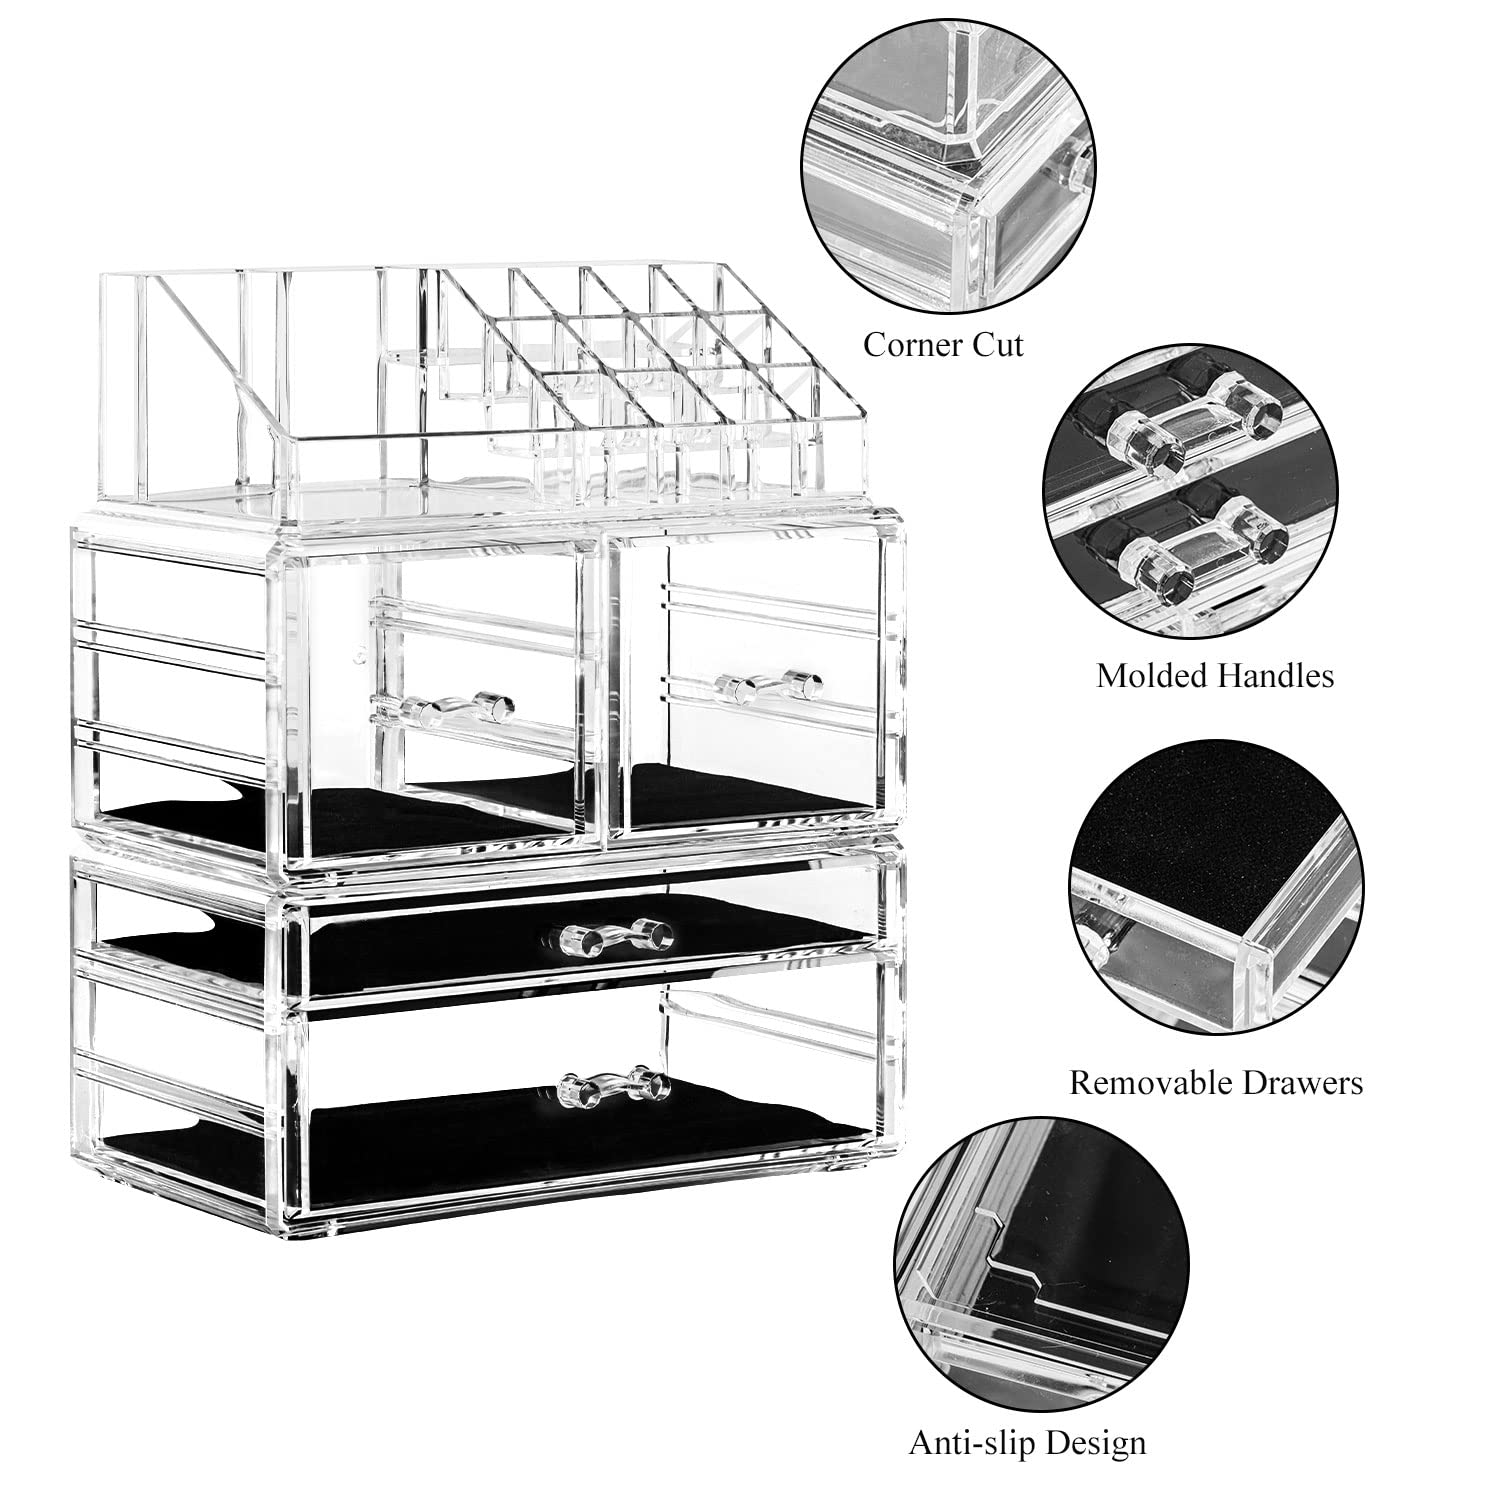 DreamGenius Makeup Organizer 3 Pieces Acrylic Cosmetic Storage Drawers Organizer for Vanity and Bathroom, Stackable Cosmetic Organizer Countertop with 4 Drawers